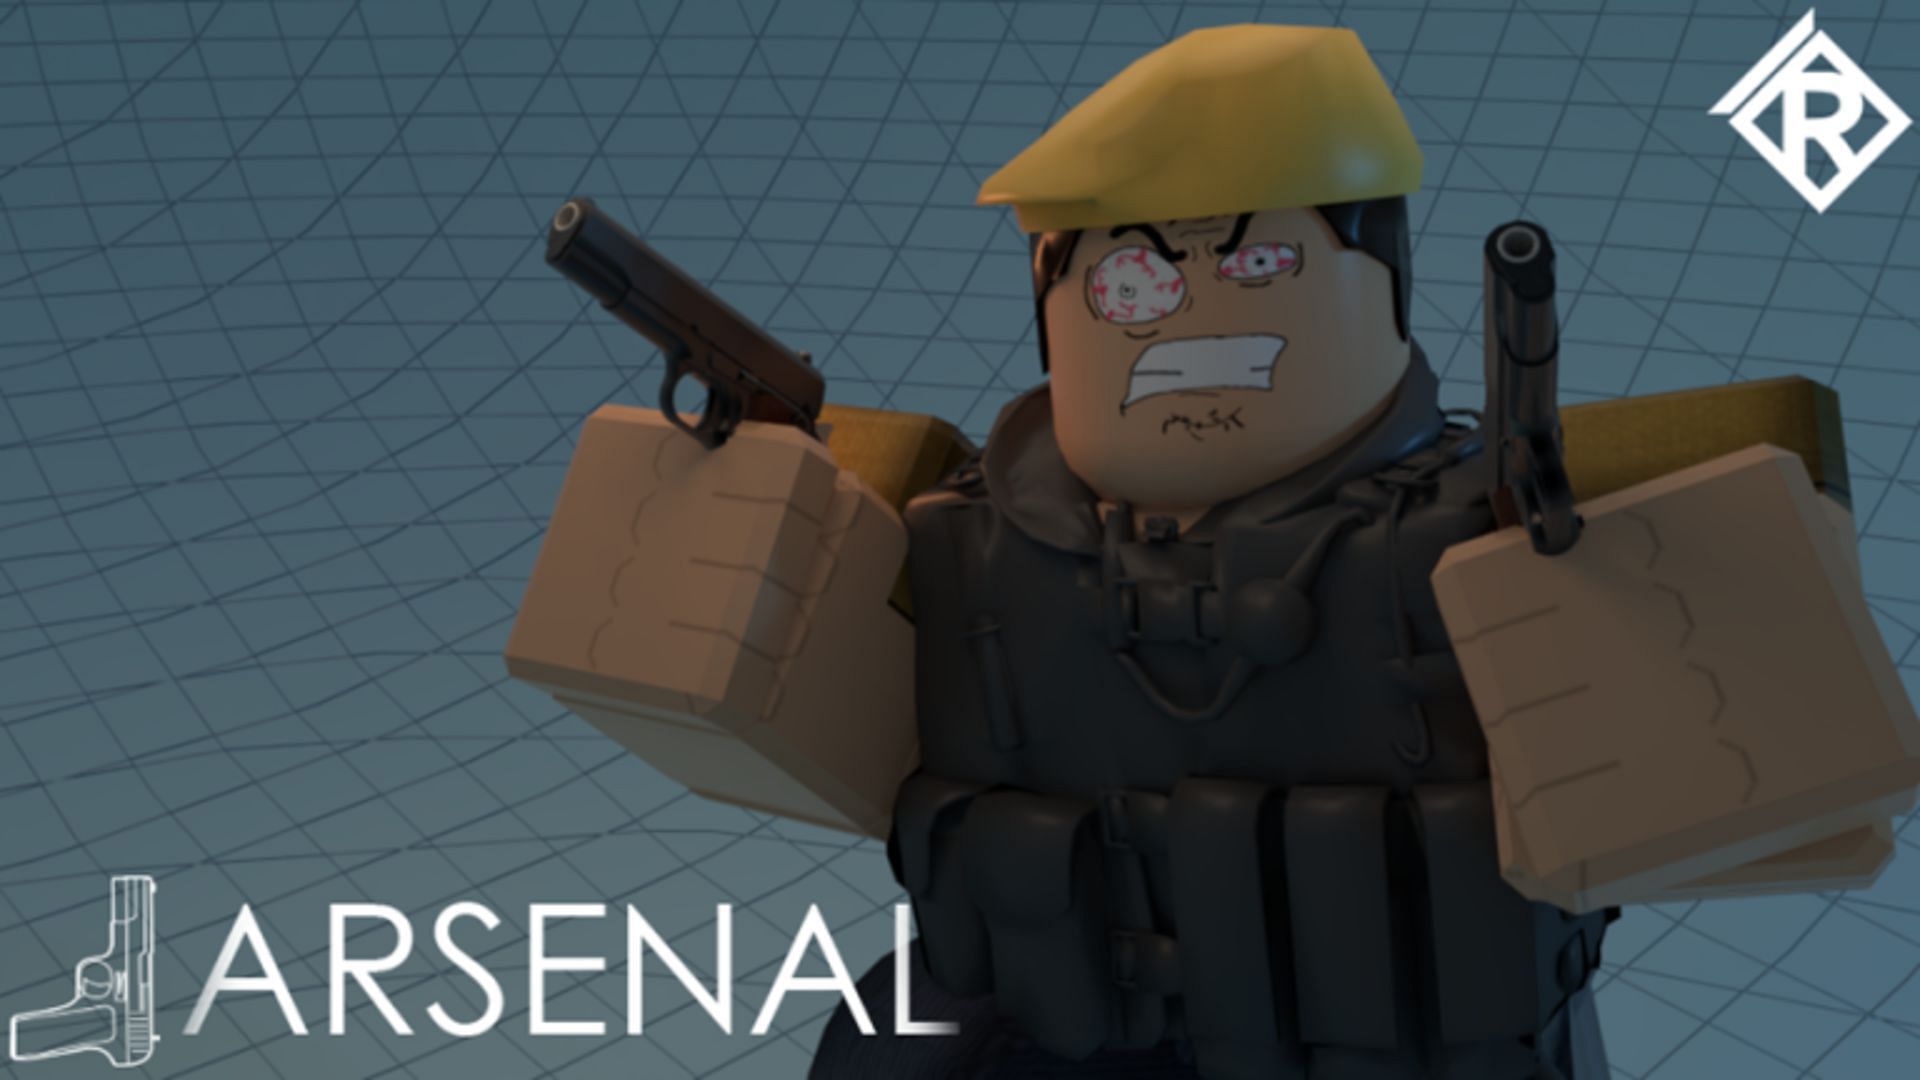 Parents want to know if Arsenal is safe for their children (Image via Roblox)